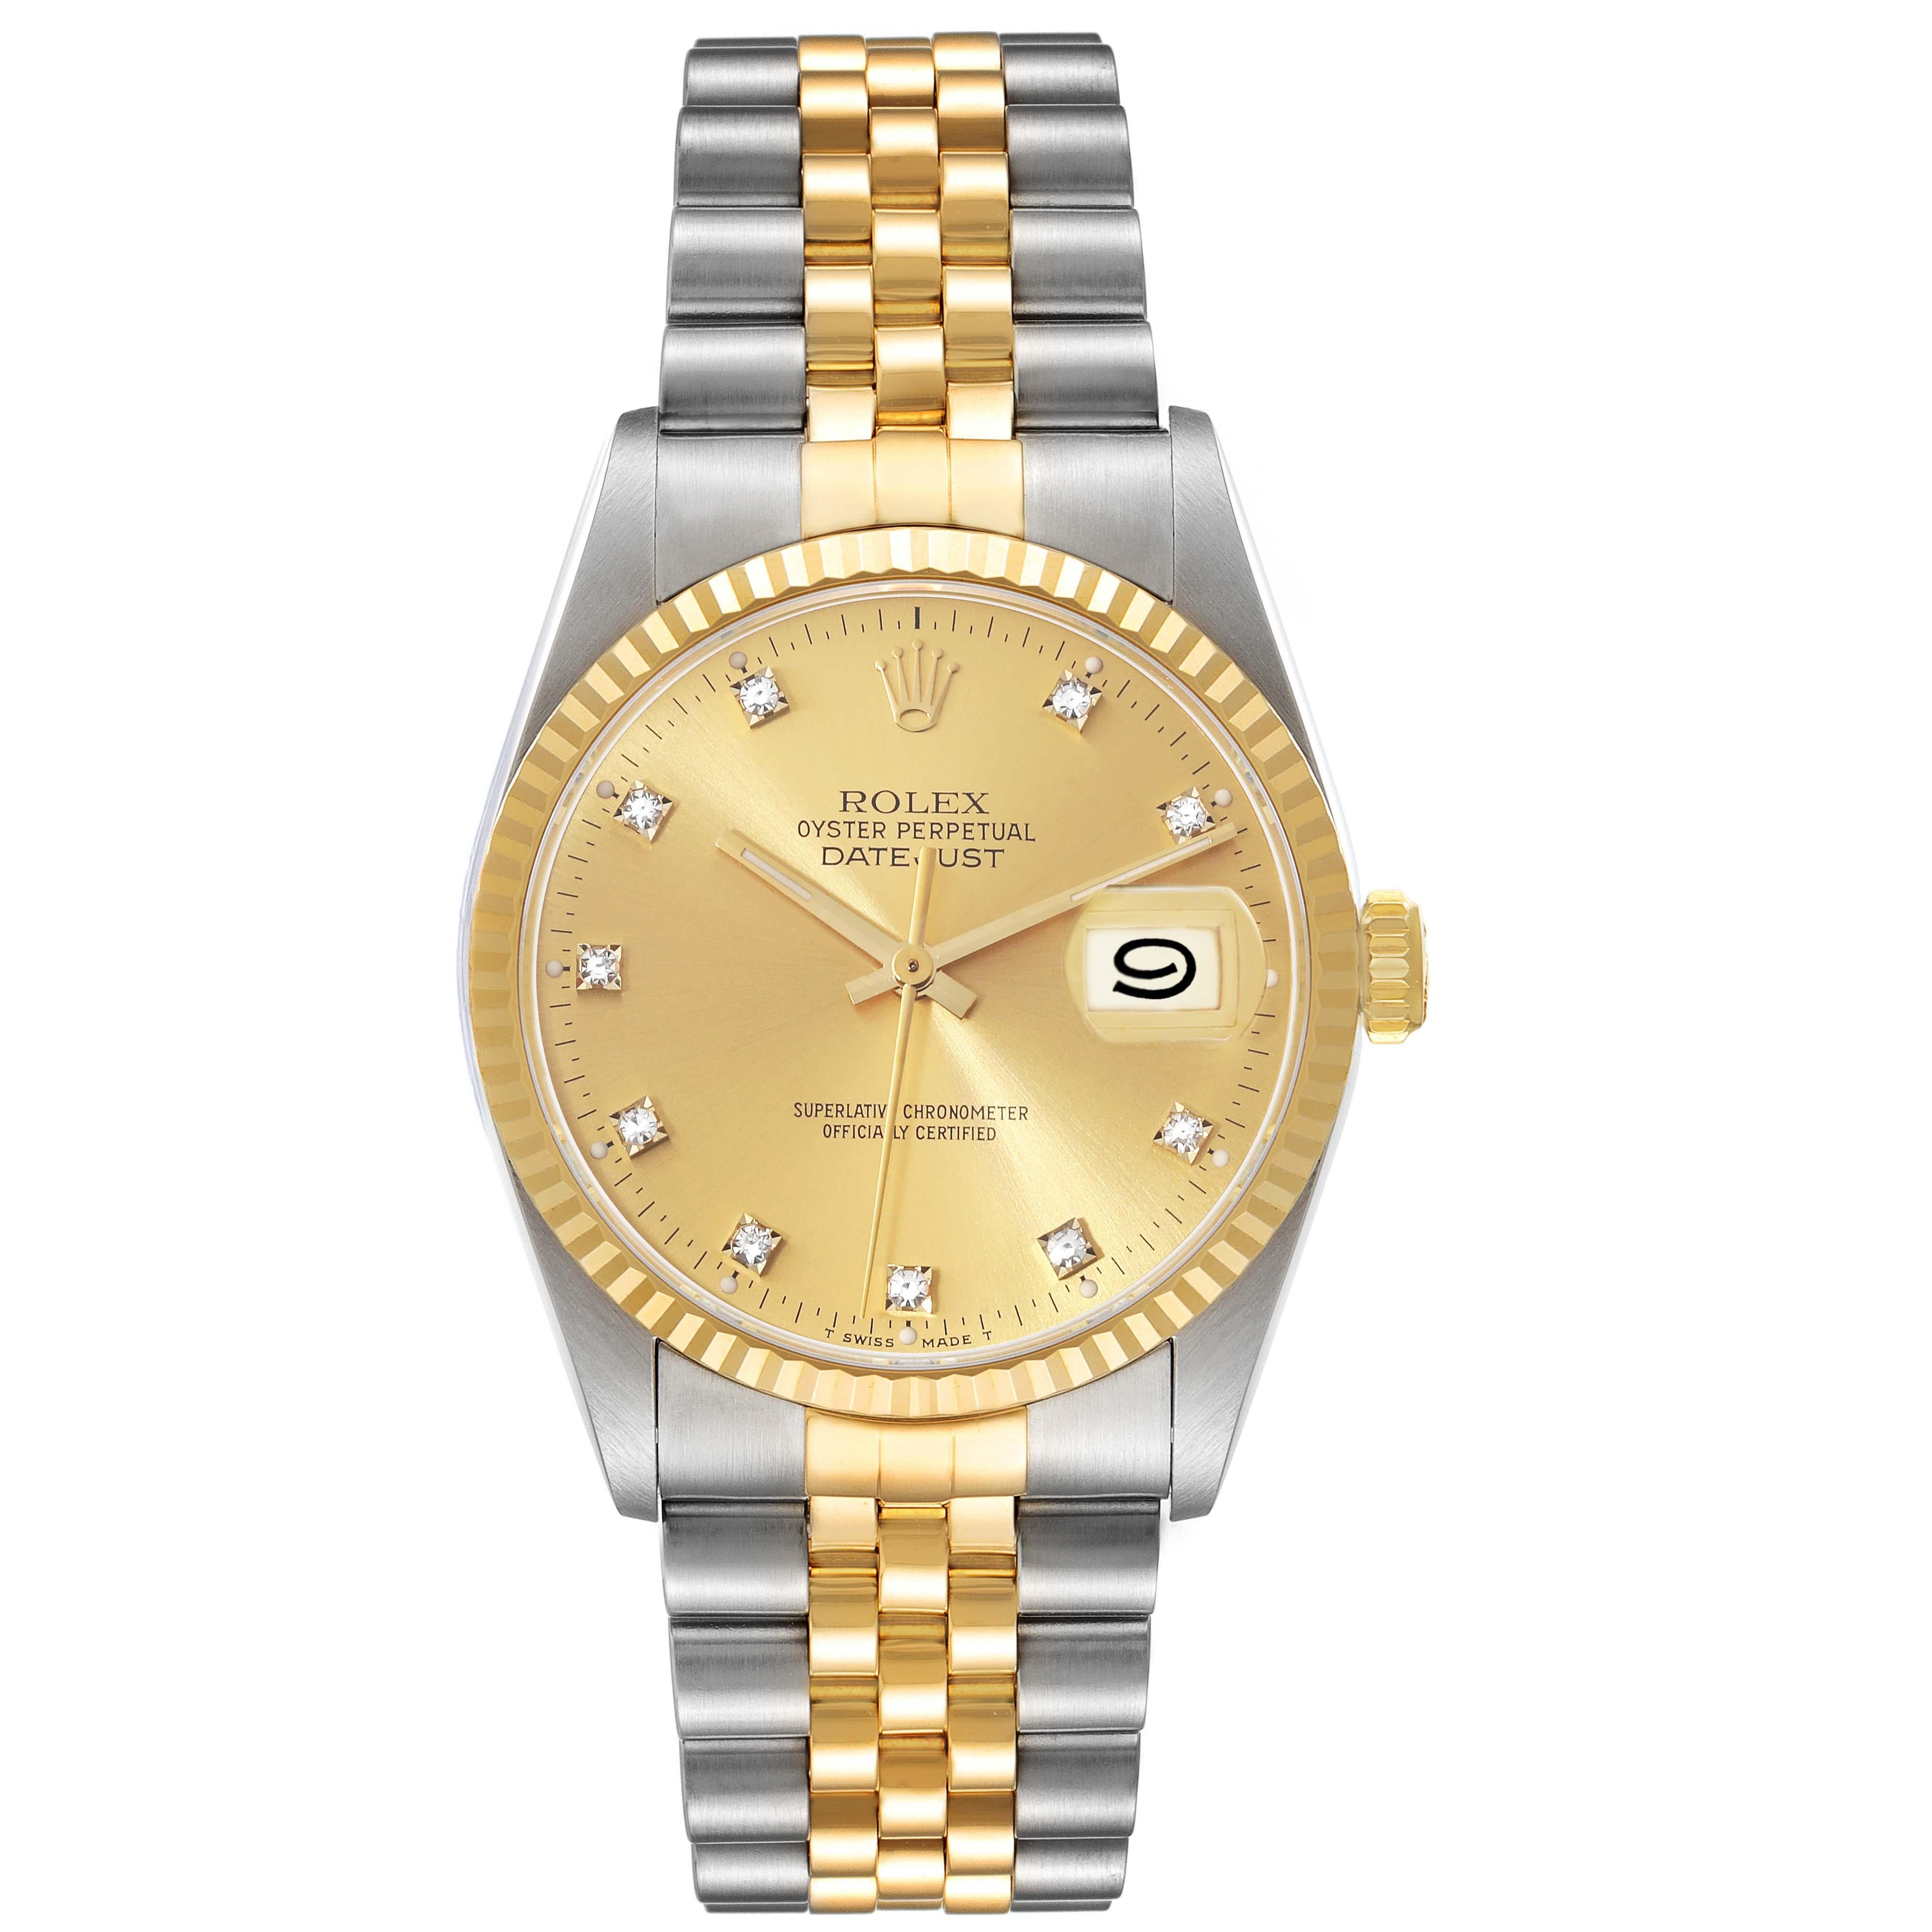 Rolex Datejust Champagne Diamond Dial Steel Yellow Gold Mens Watch 16233. Officially certified chronometer automatic self-winding movement. Stainless steel case 36 mm in diameter.  Rolex logo on an 18K yellow gold crown. 18k yellow gold fluted